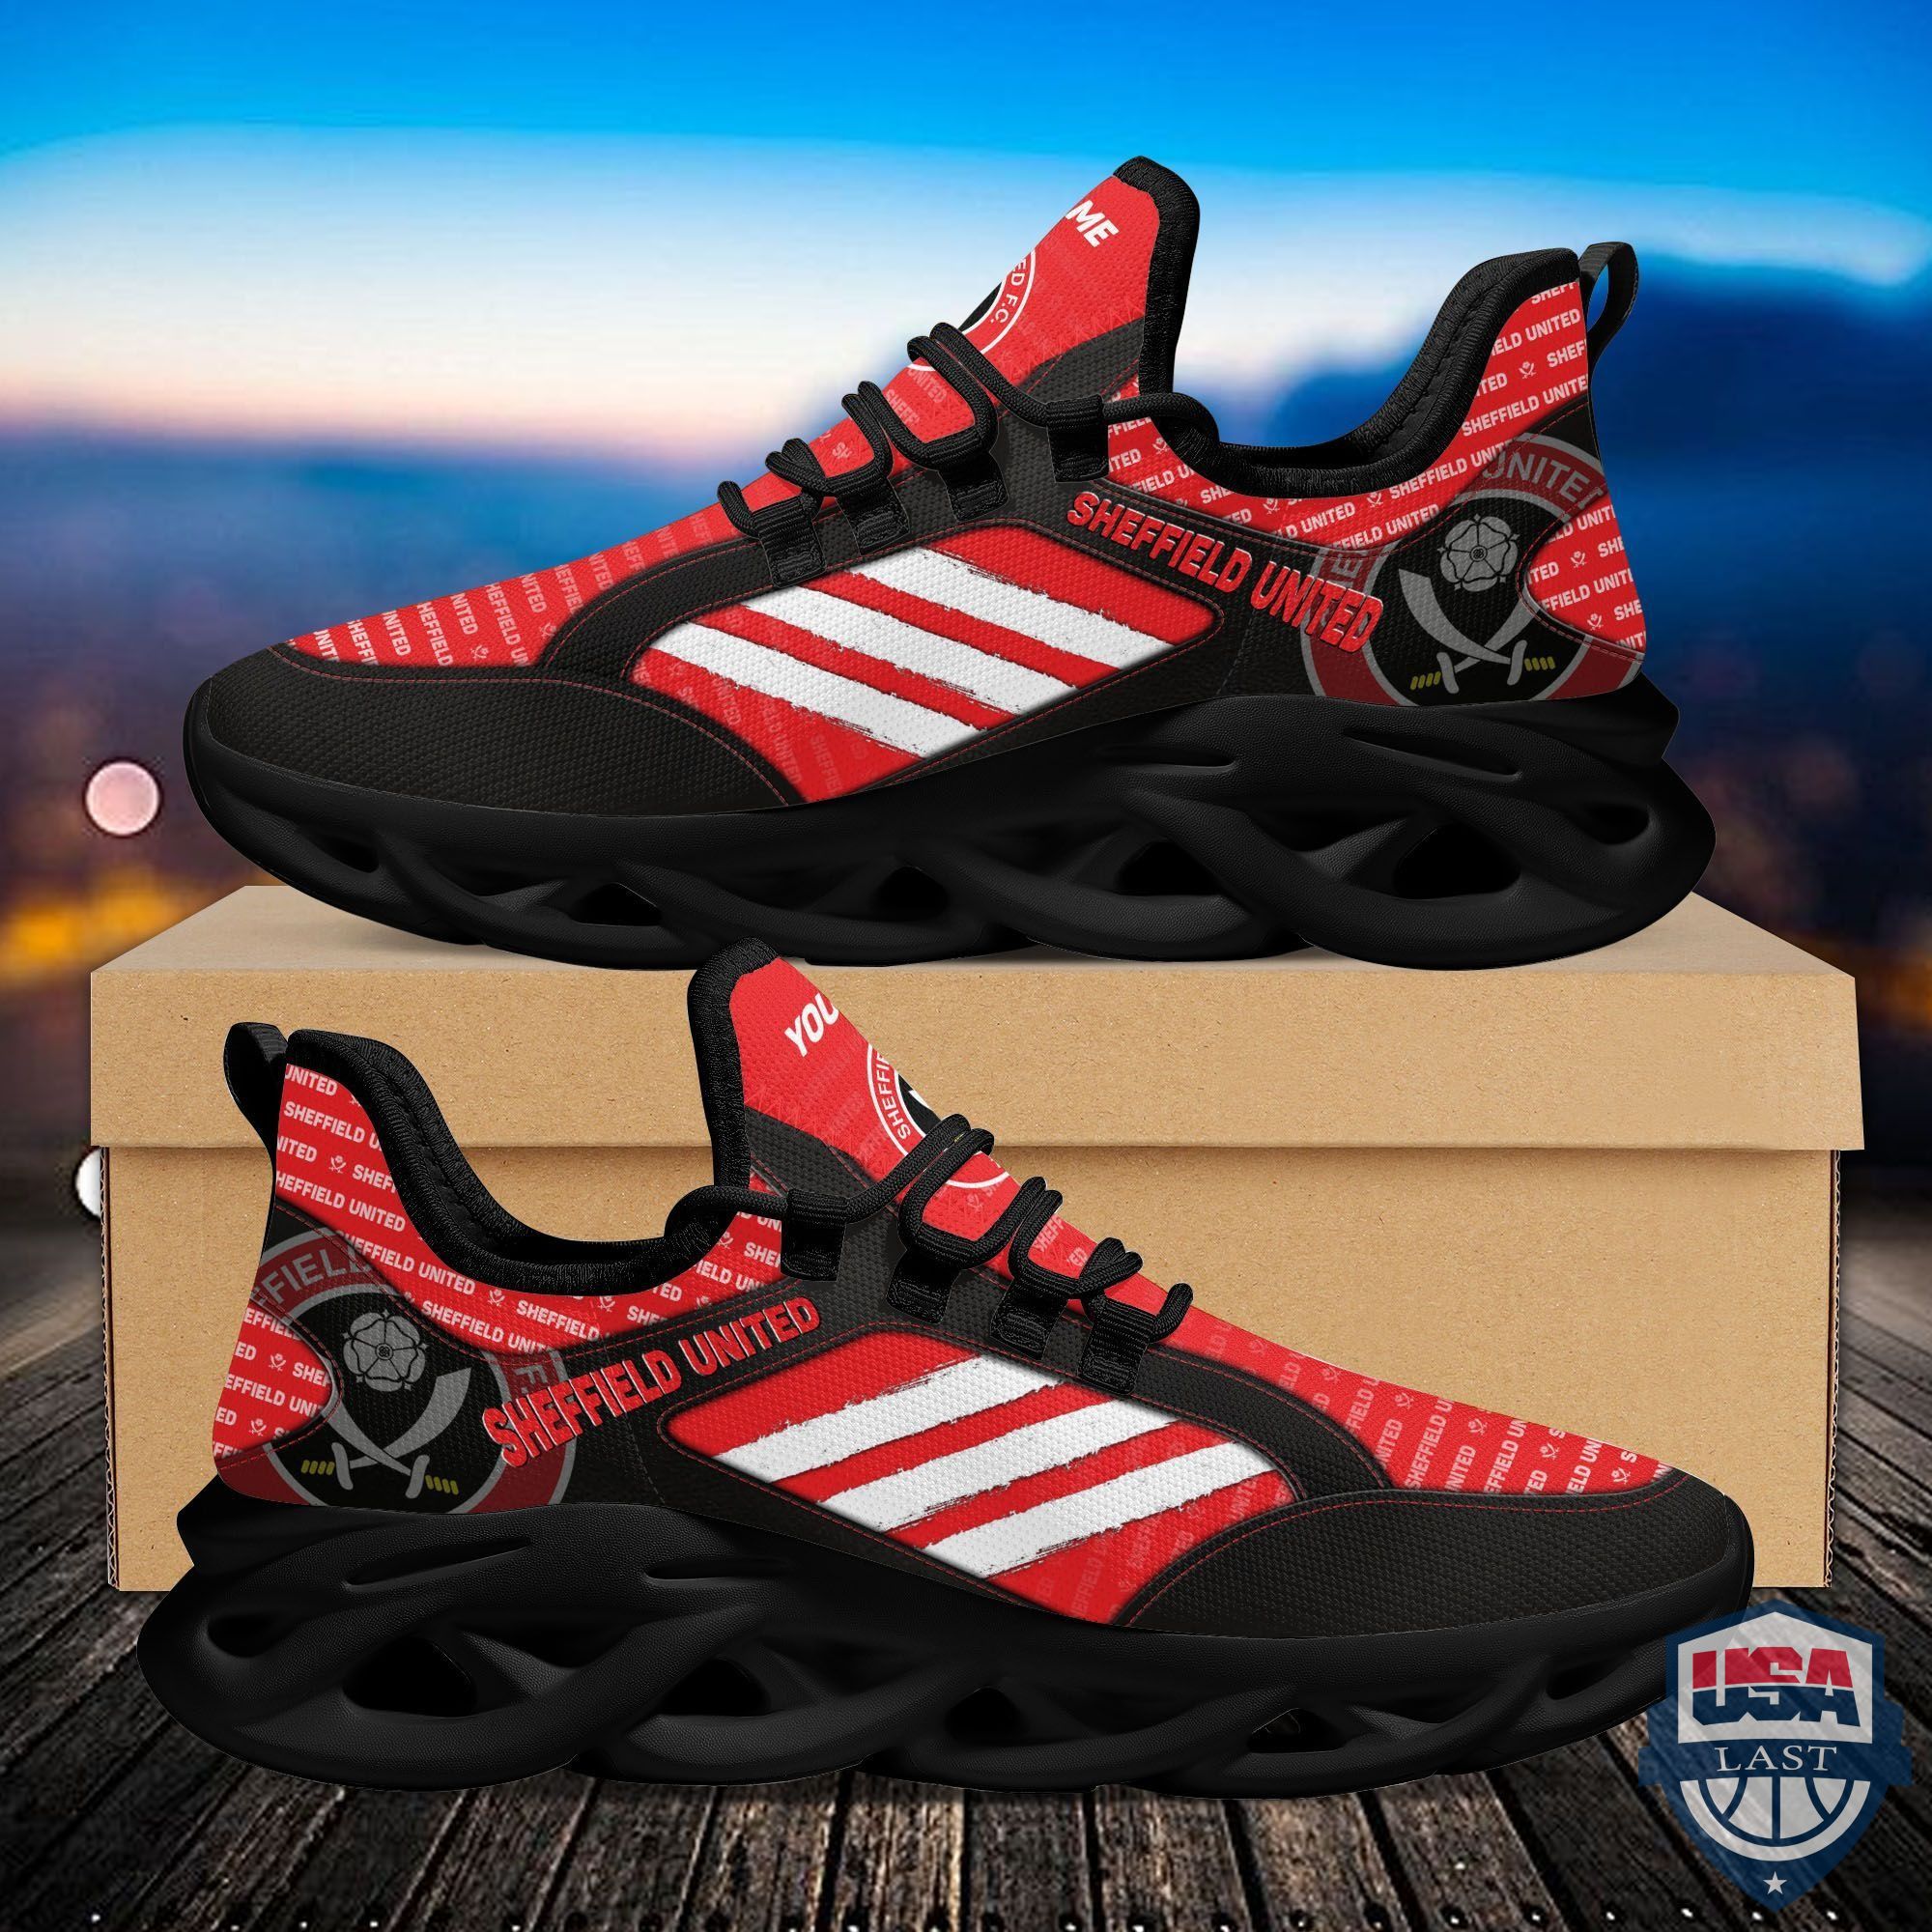 Fg69cW92-T140122-142xxxPersonalized-Sheffield-United-FC-Max-Soul-Sneakers-Running-Shoes.jpg